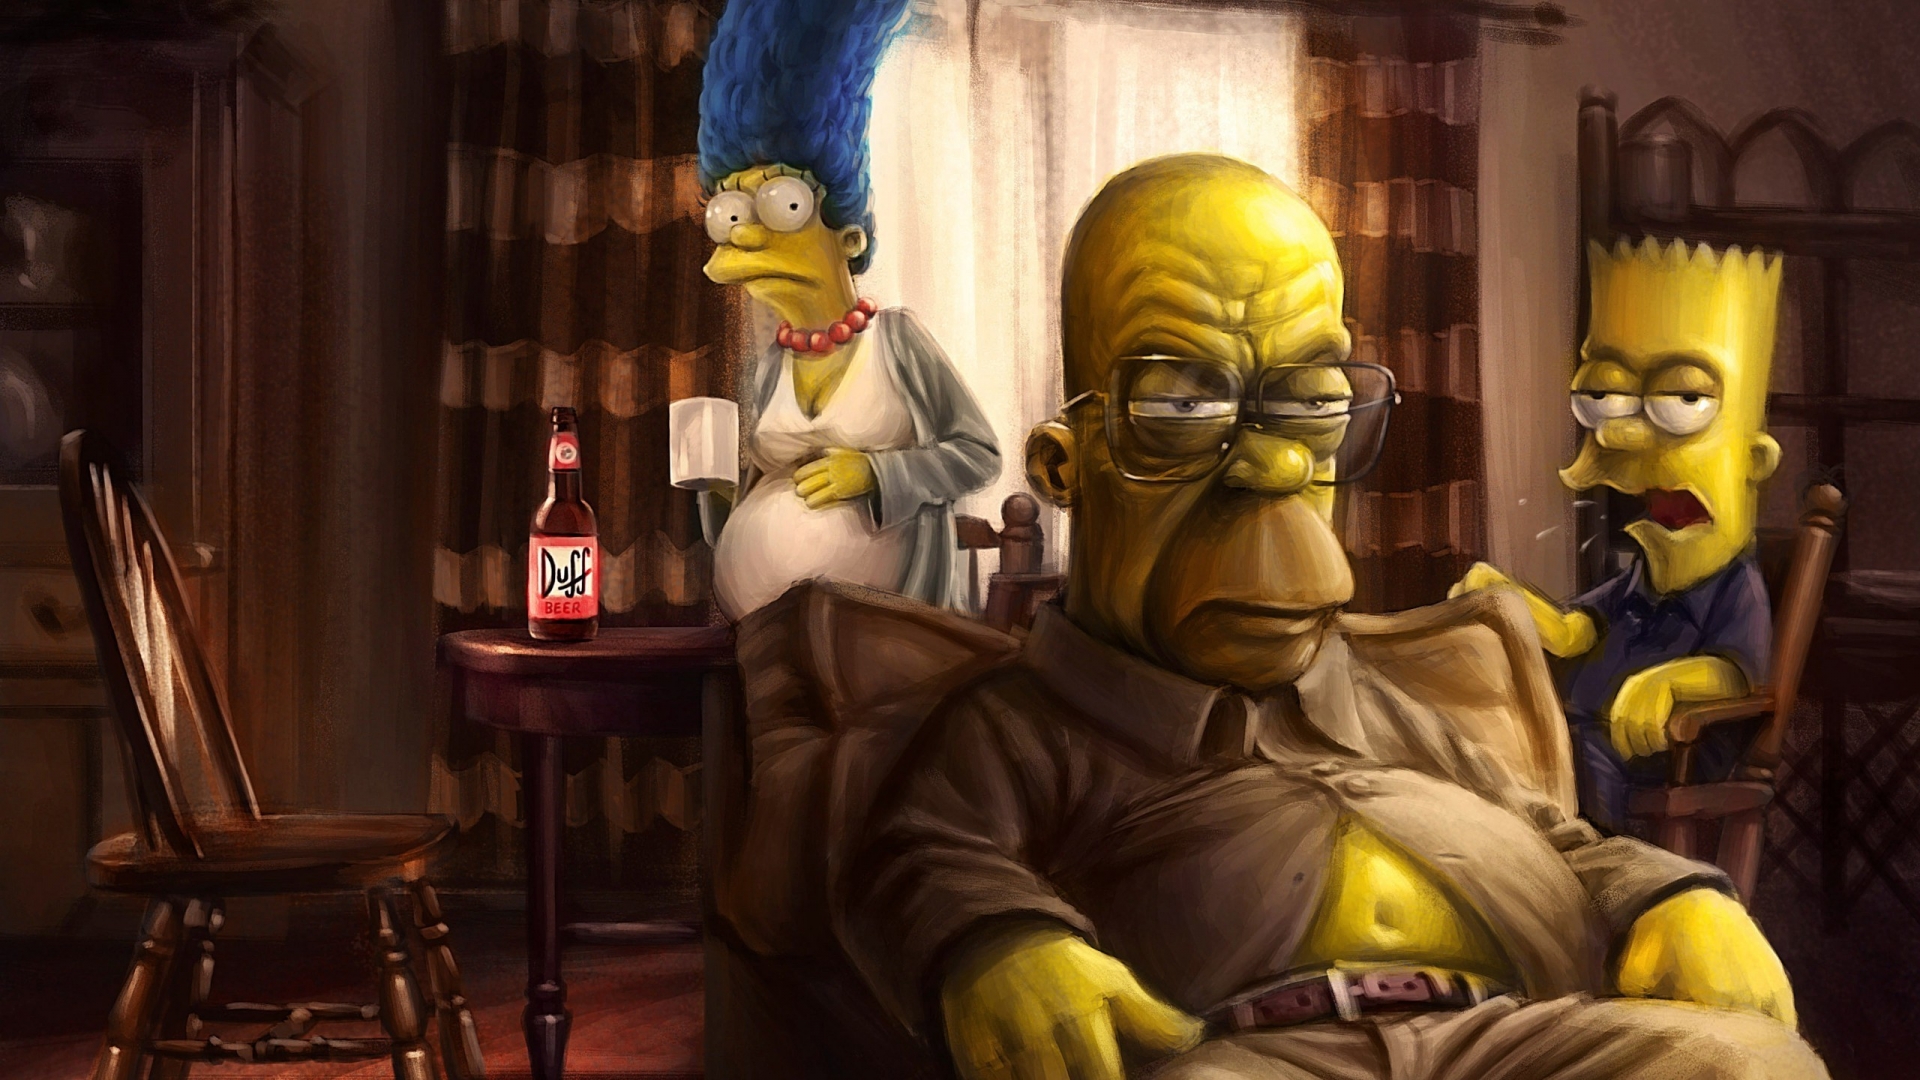 The Simpsons Breaking Bad for 1920 x 1080 HDTV 1080p resolution